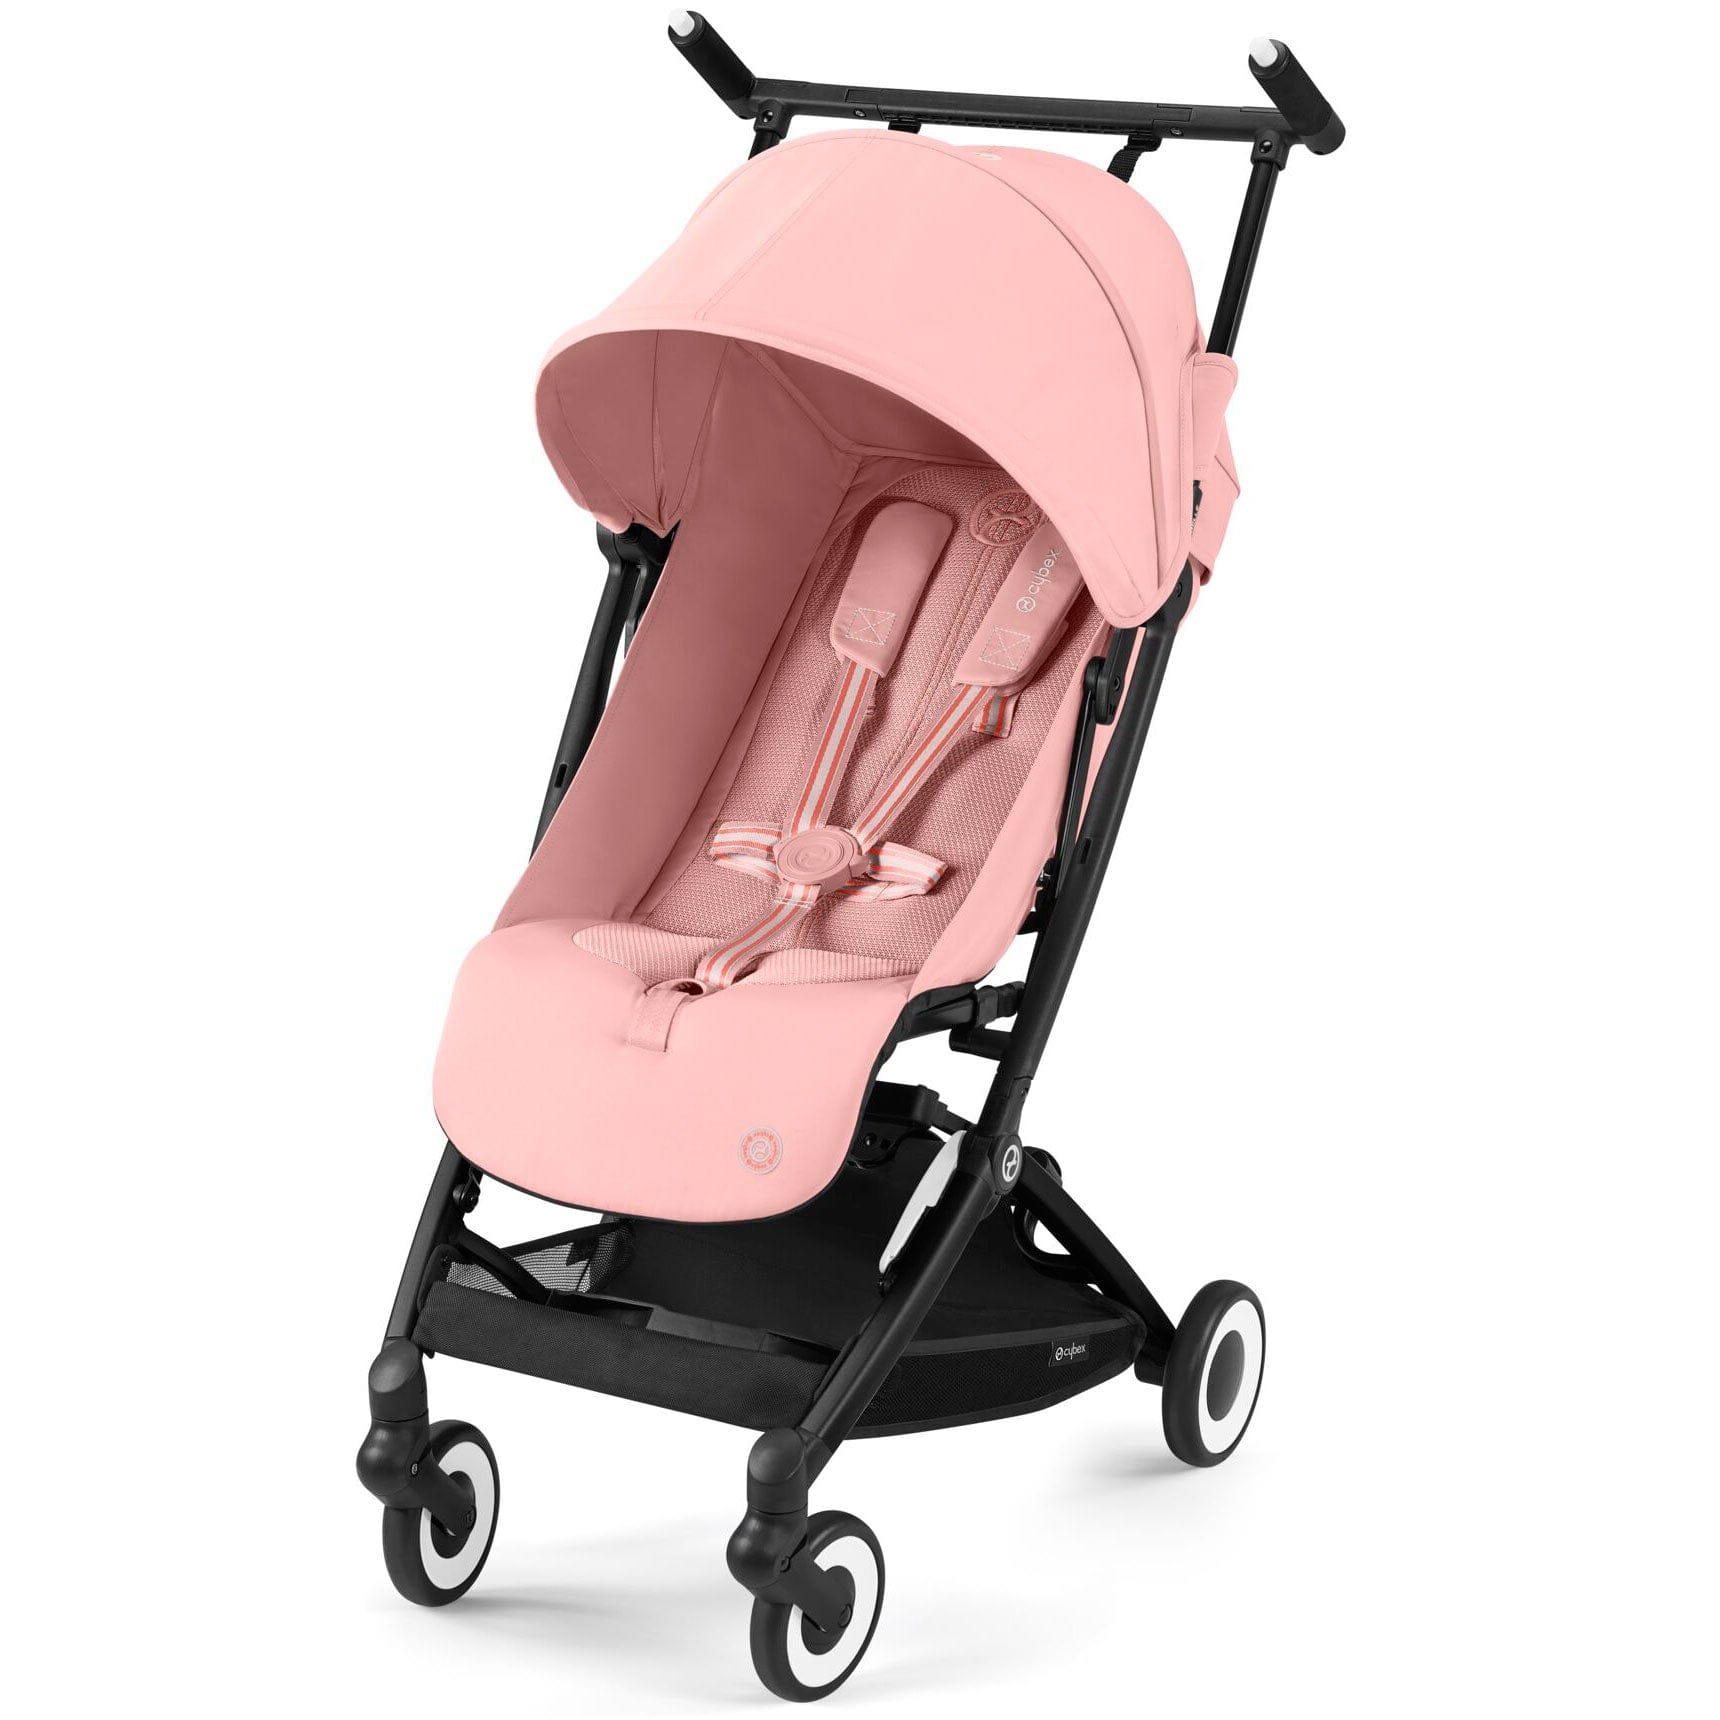 Cybex Libelle in Candy Pink Pushchairs & Buggies